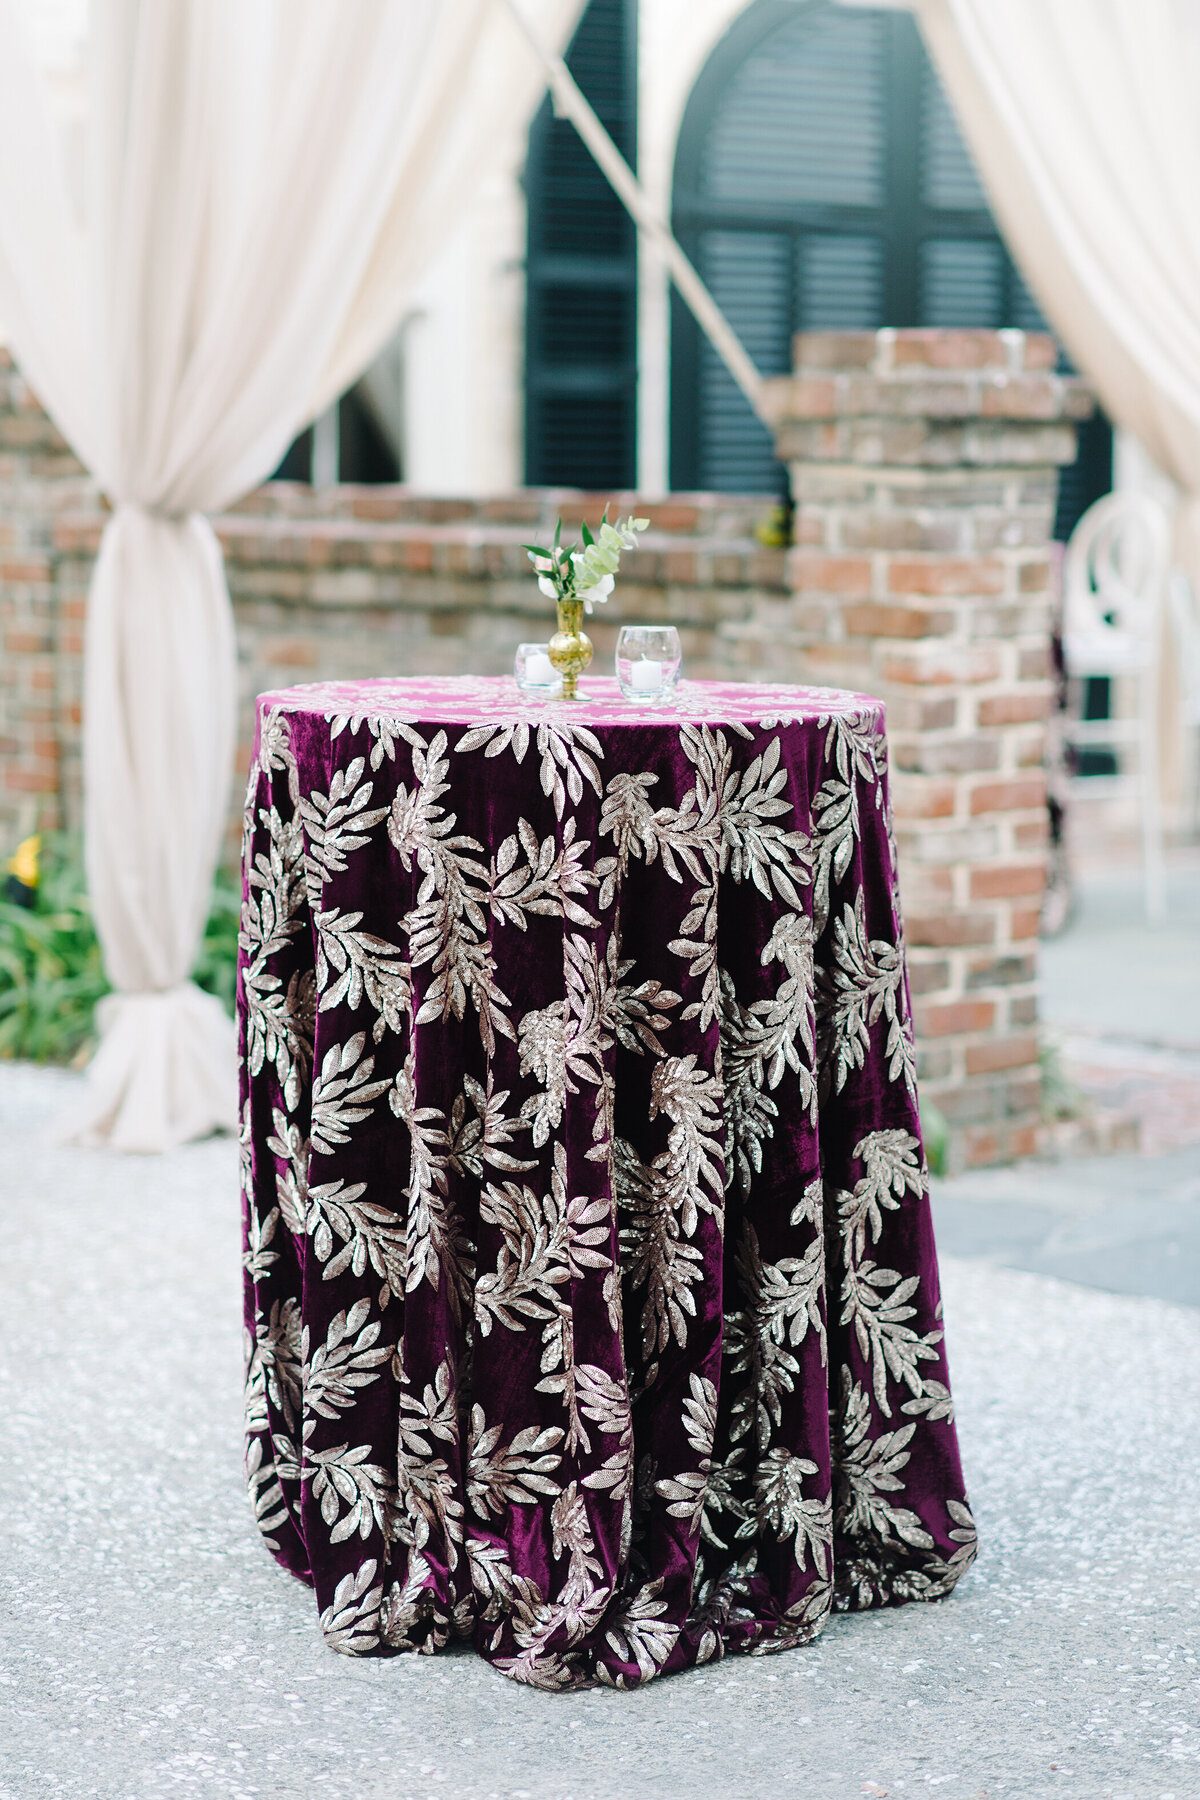 Chanel + Alex | Wedding at William Aiken House by Pure Luxe Bride: Charleston Wedding and Event Planners